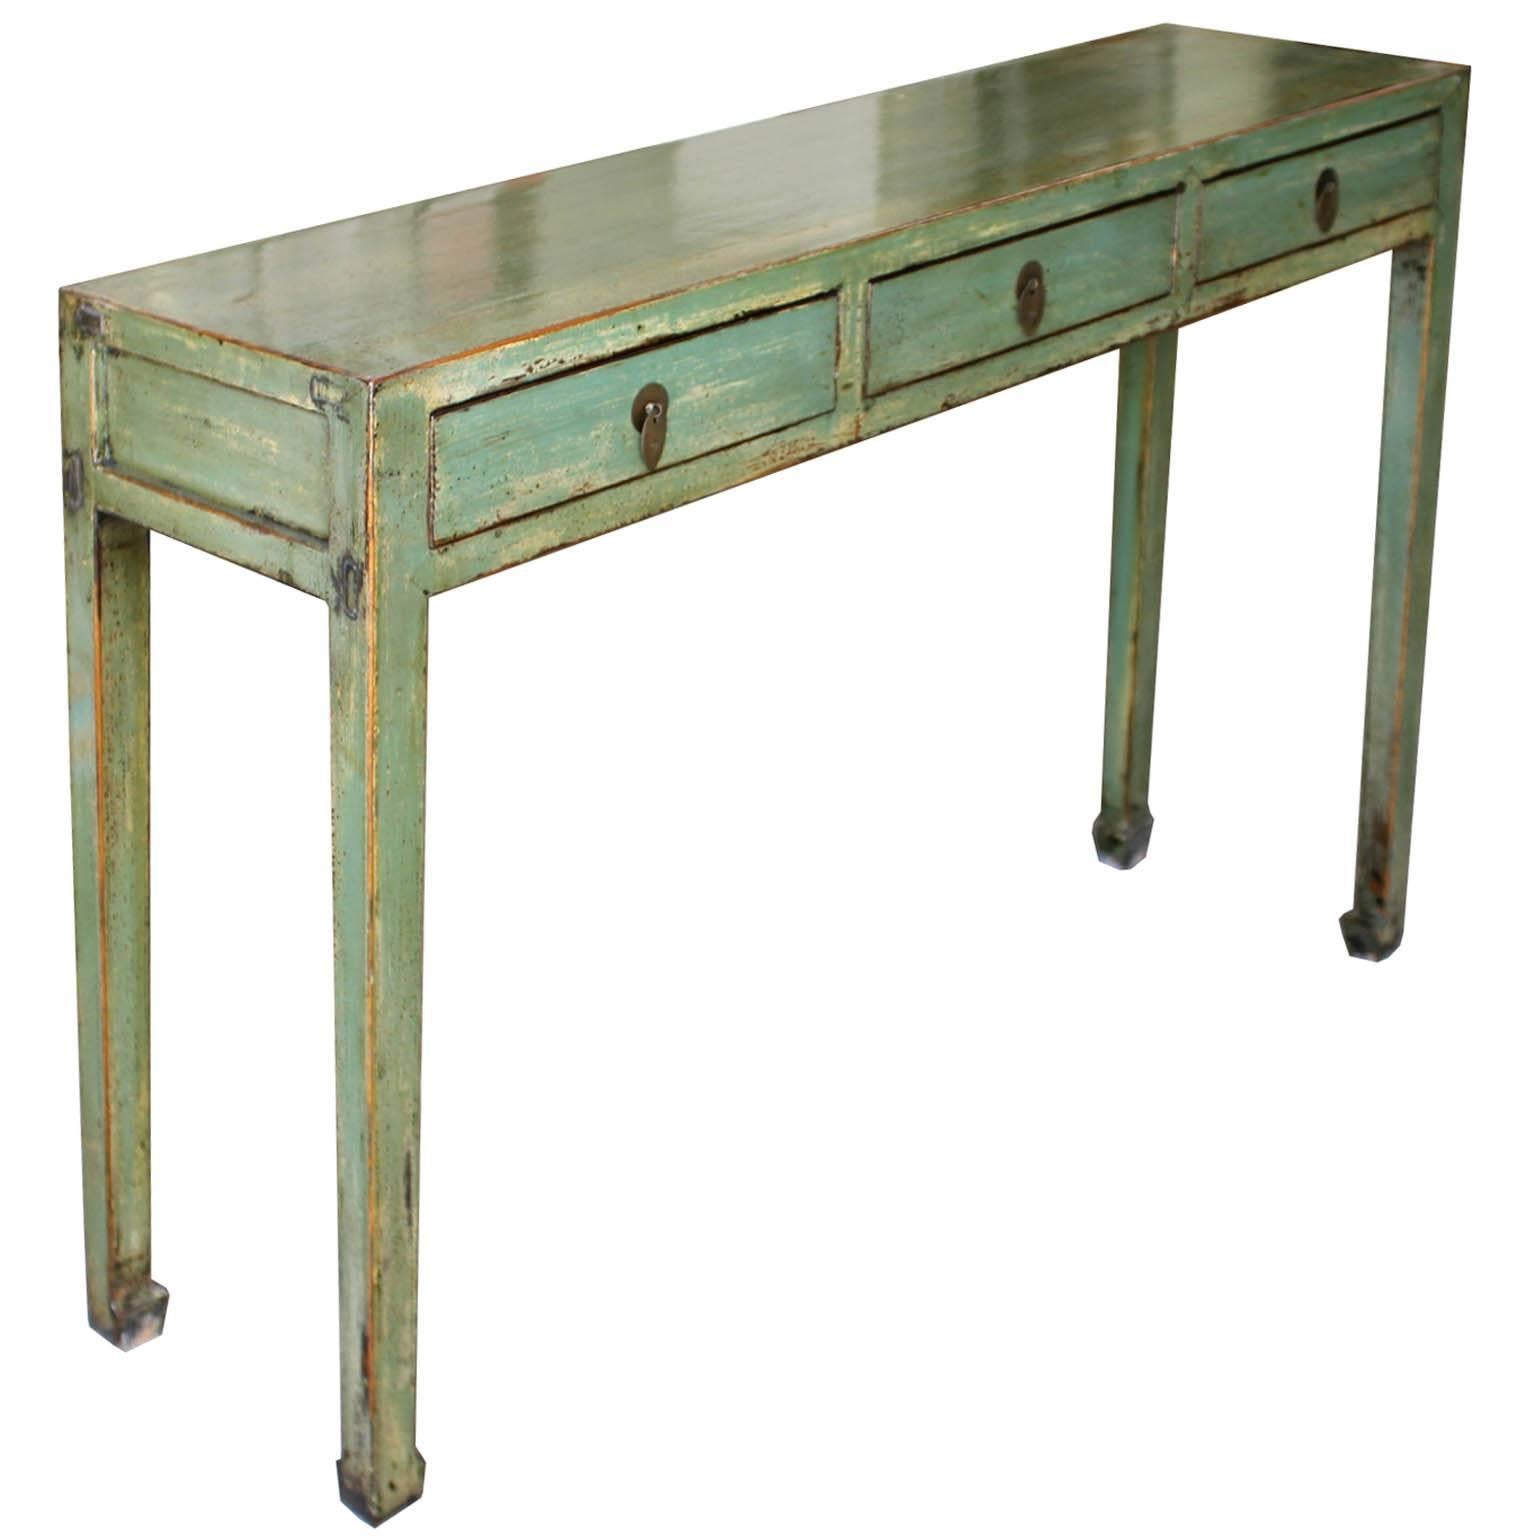 Contemporary three-drawer green lacquer console table can be placed behind a sofa or in an entry way.